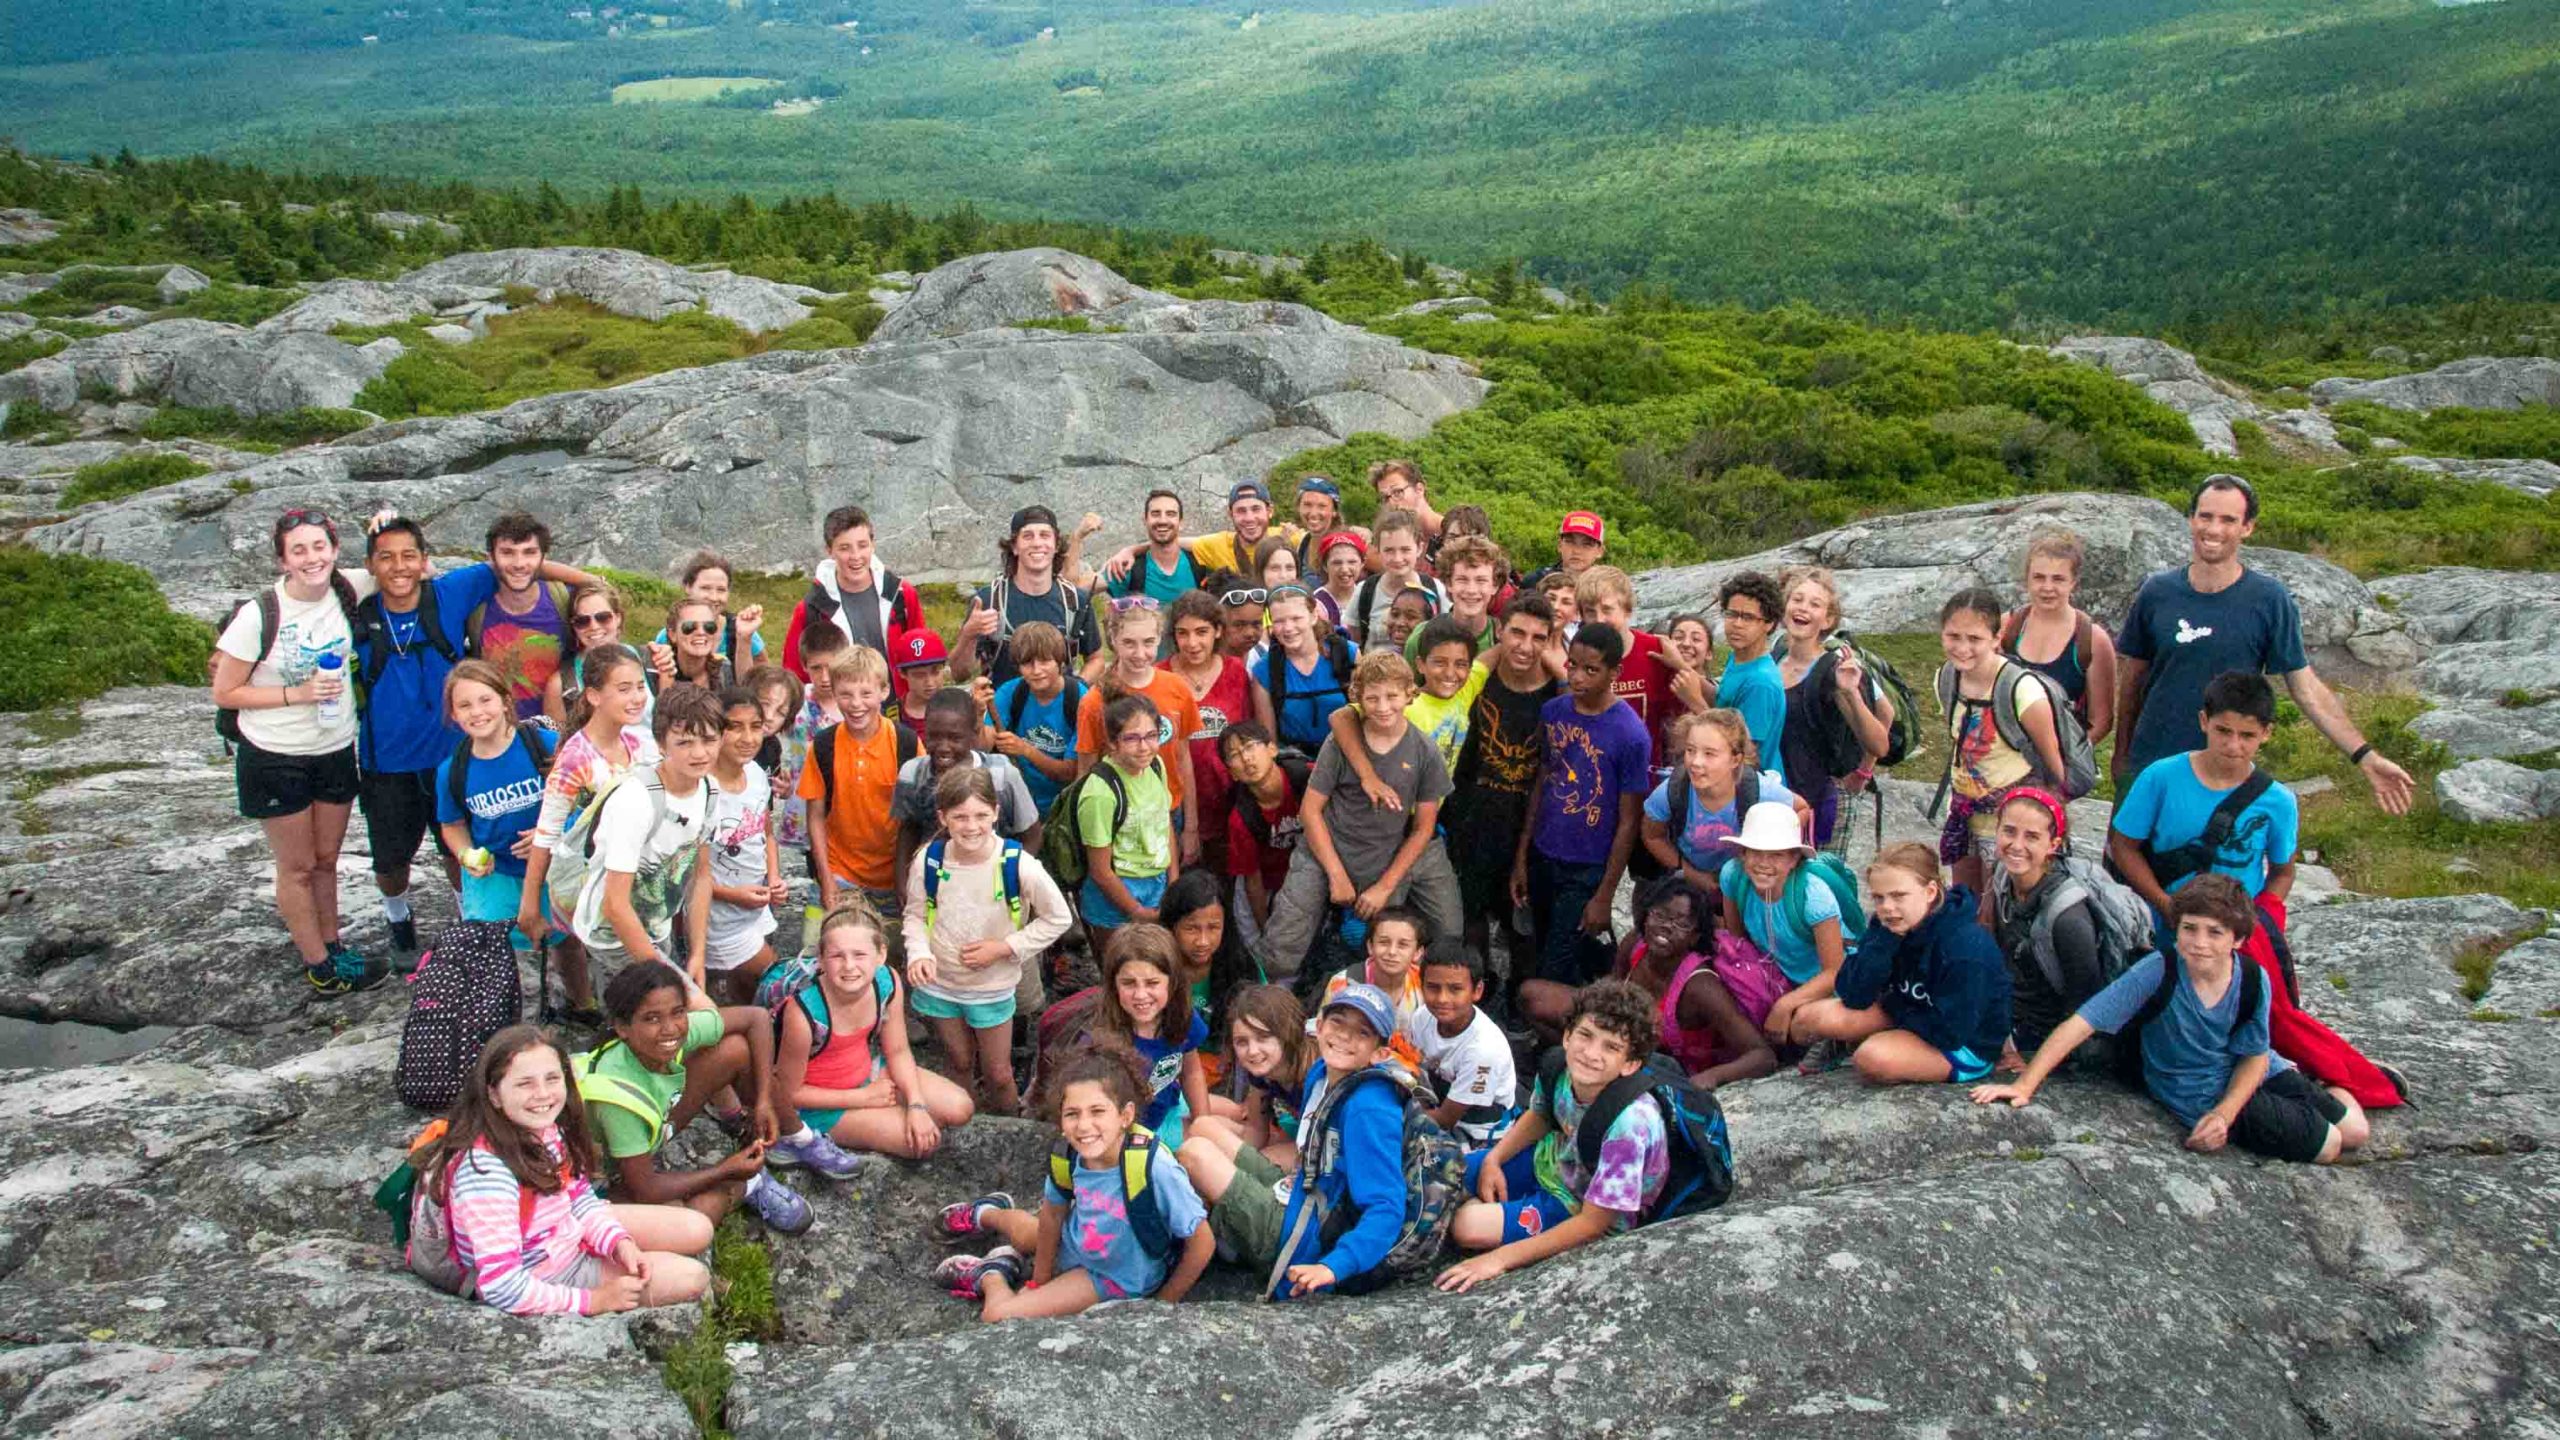 A large group of campers smiling at the camera on a hike on top of a mountain.